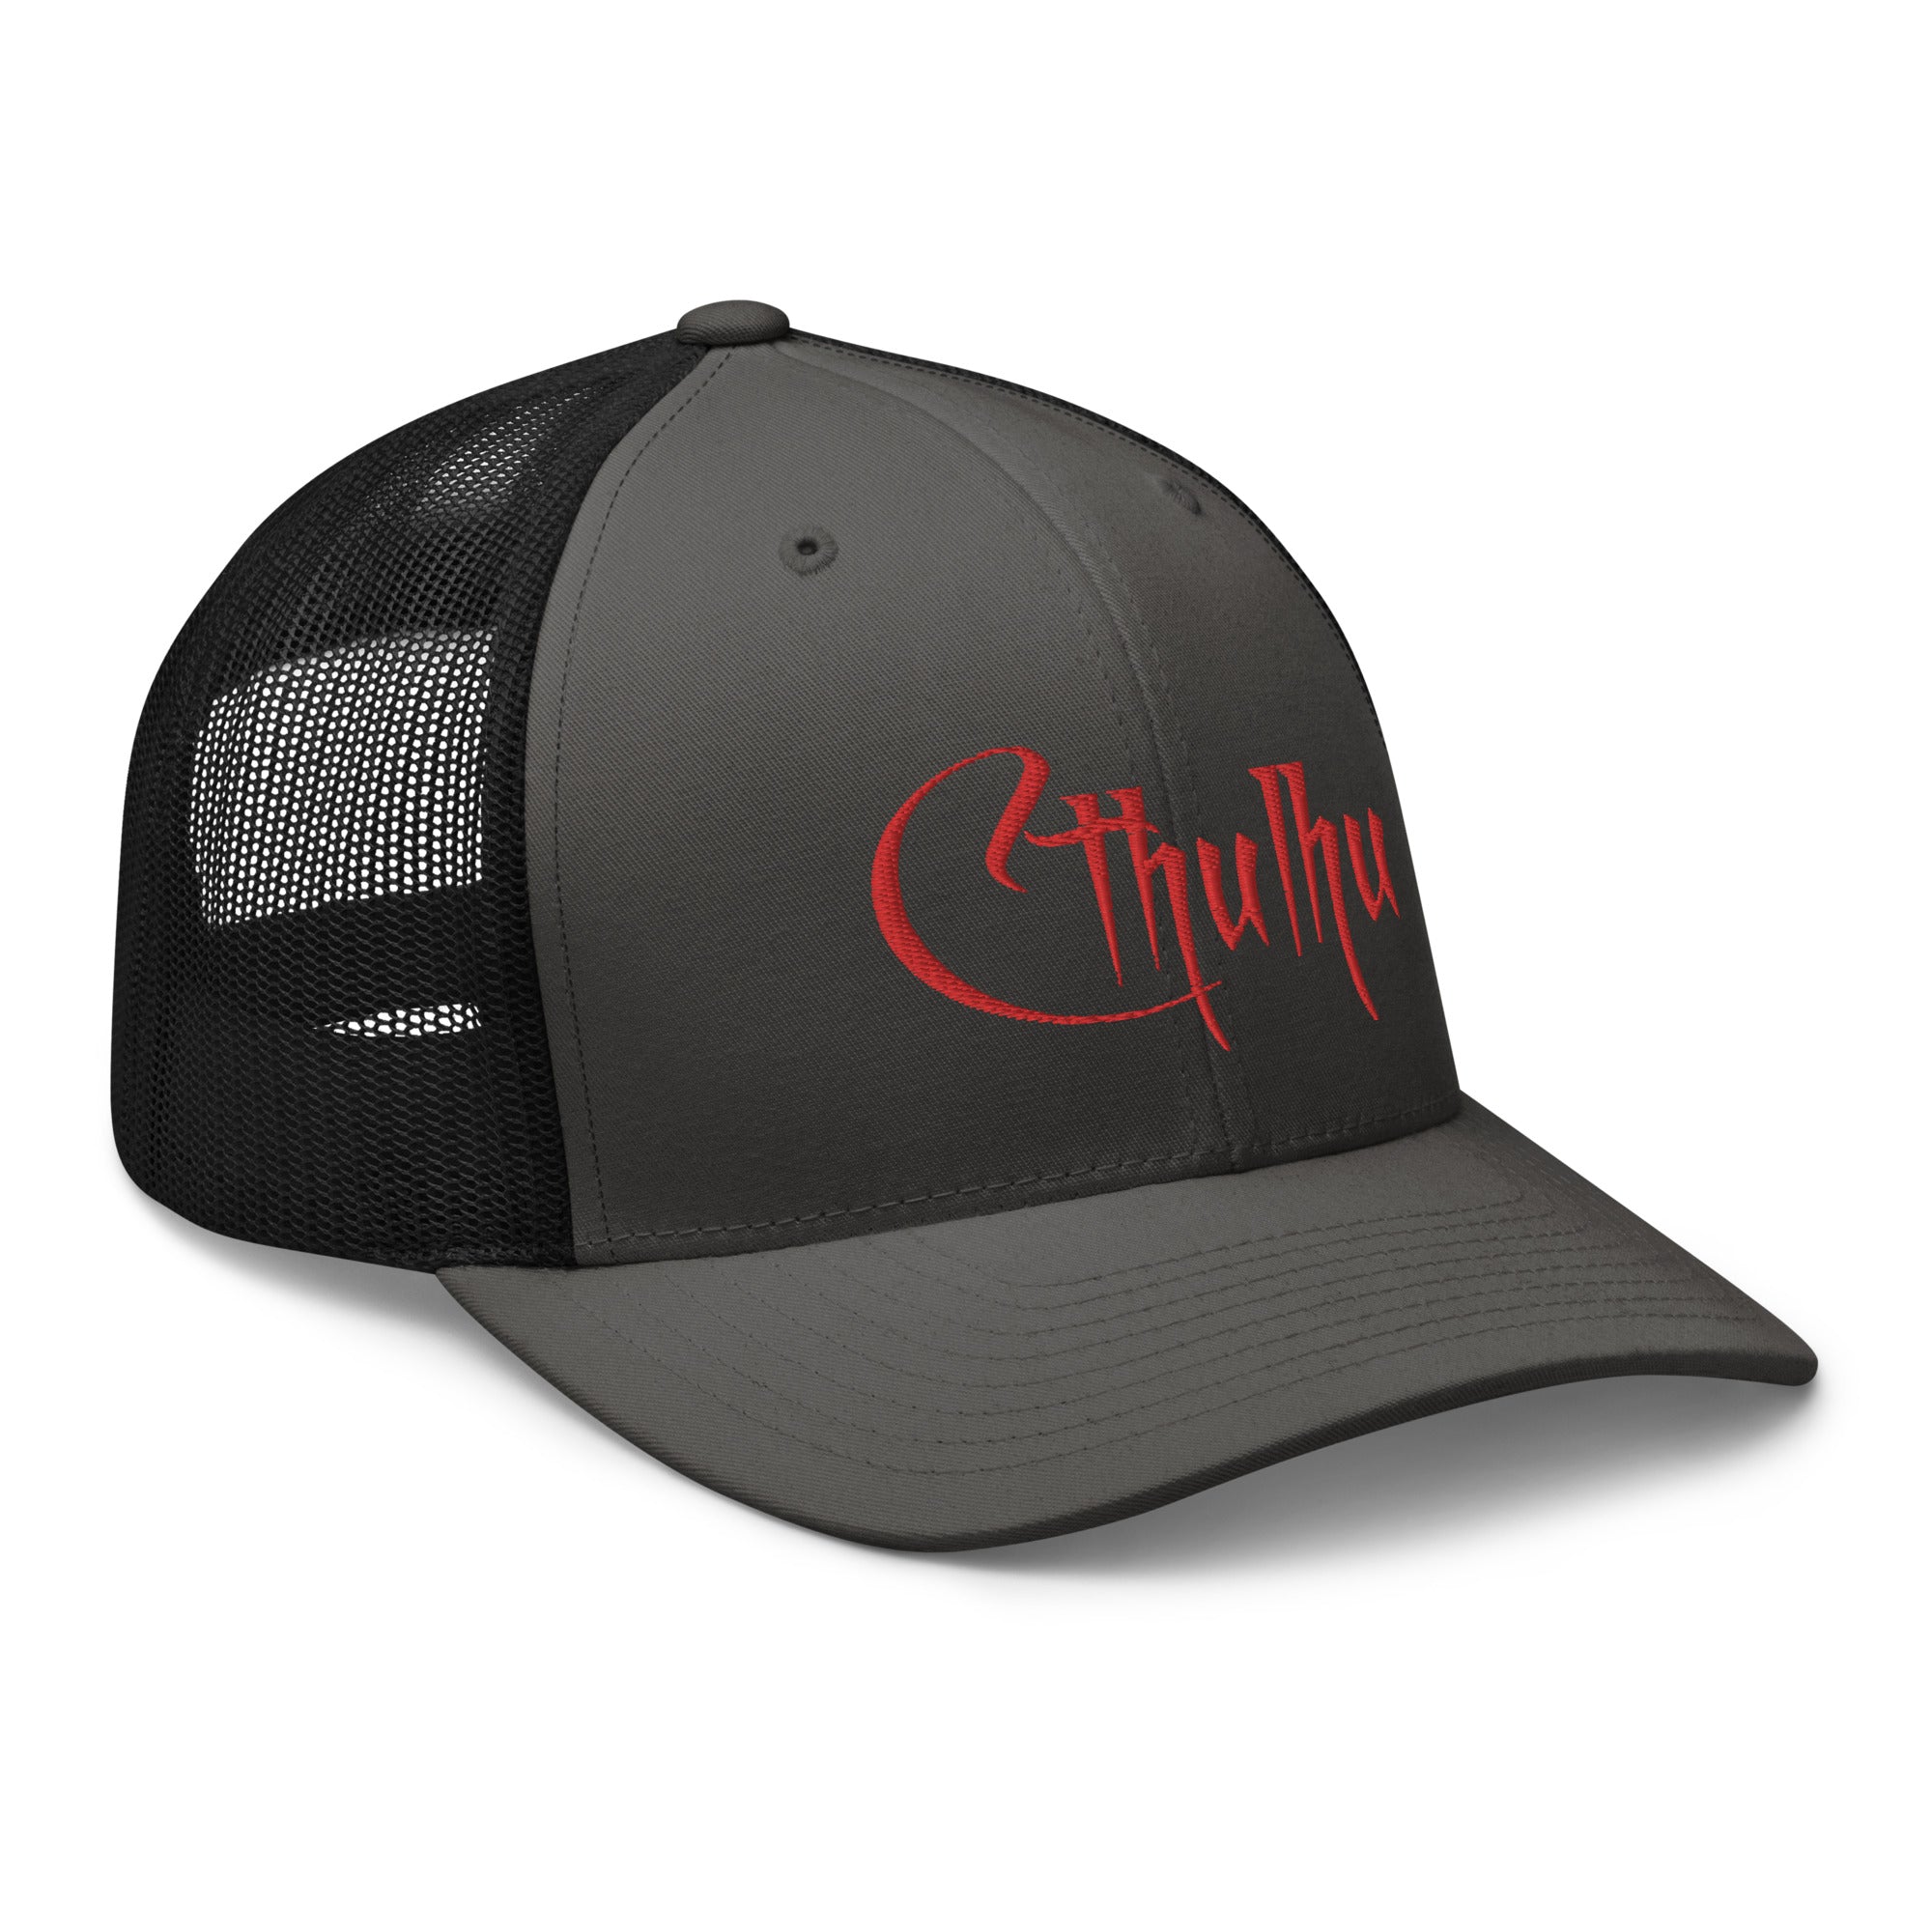 Red Call of Cthulhu Great Old Ones Embroidered Trucker Cap Snapback Hat